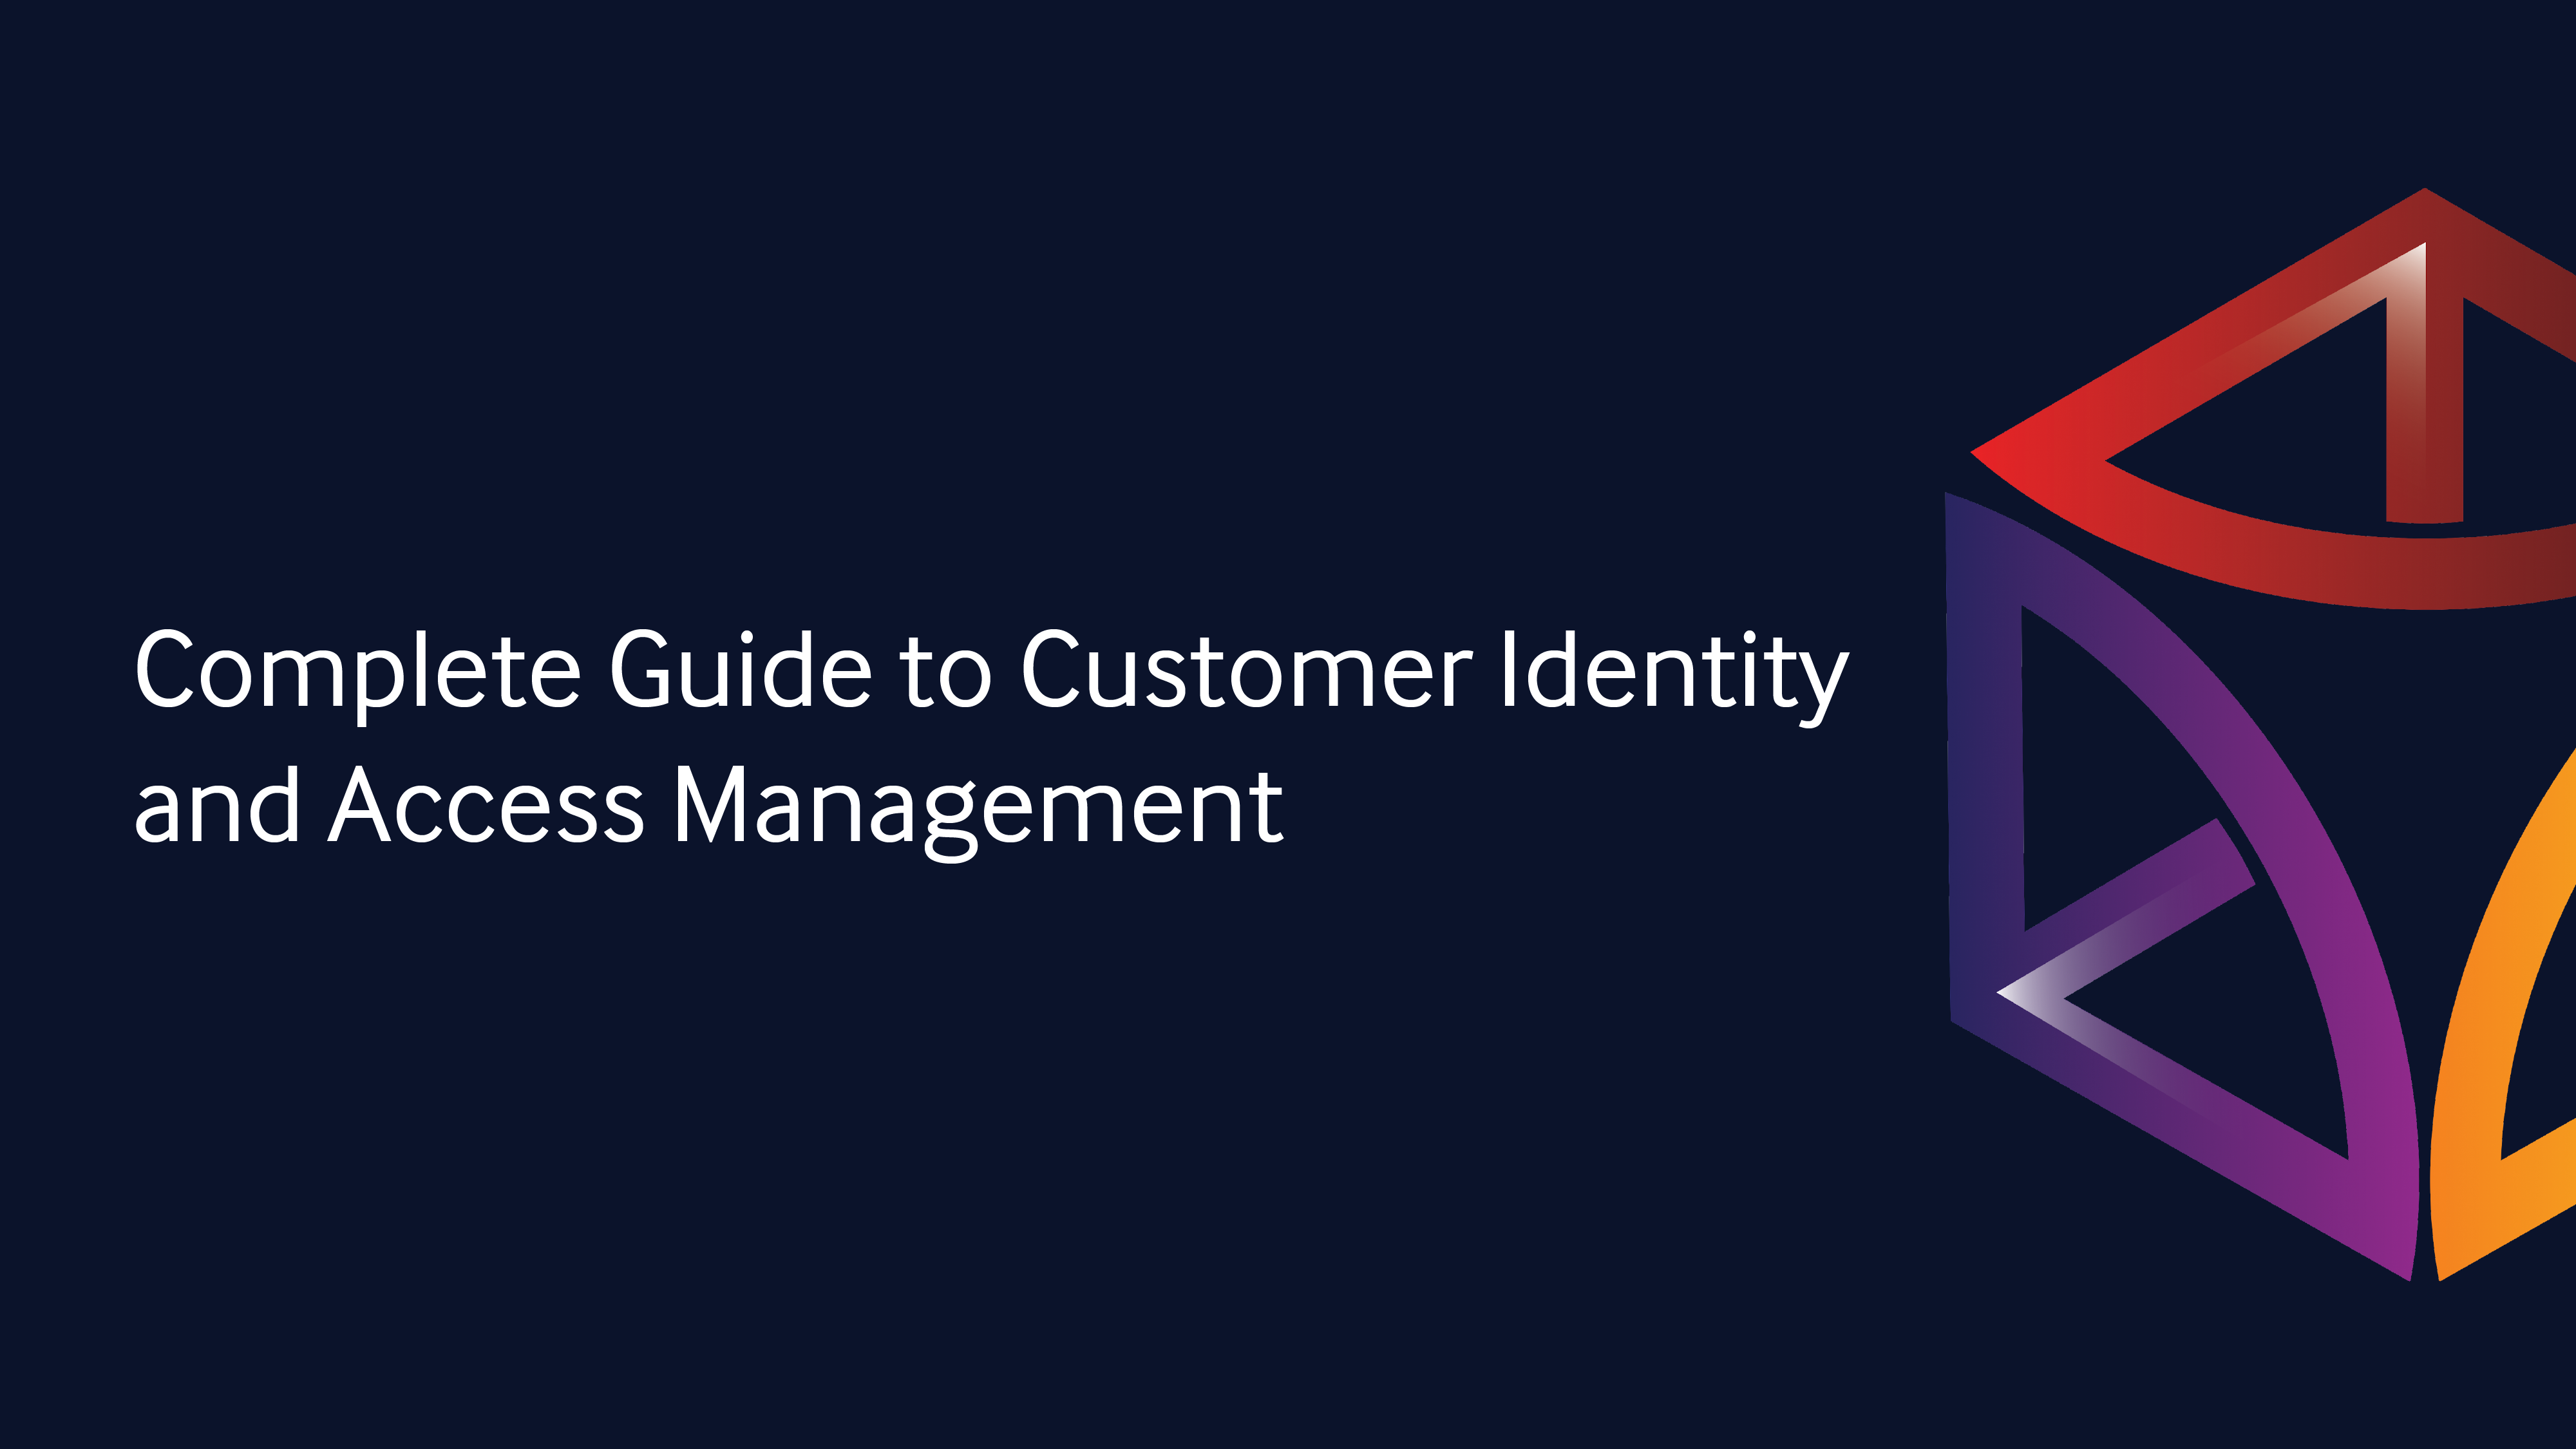 Complete Guide to Customer Identity and Access Management